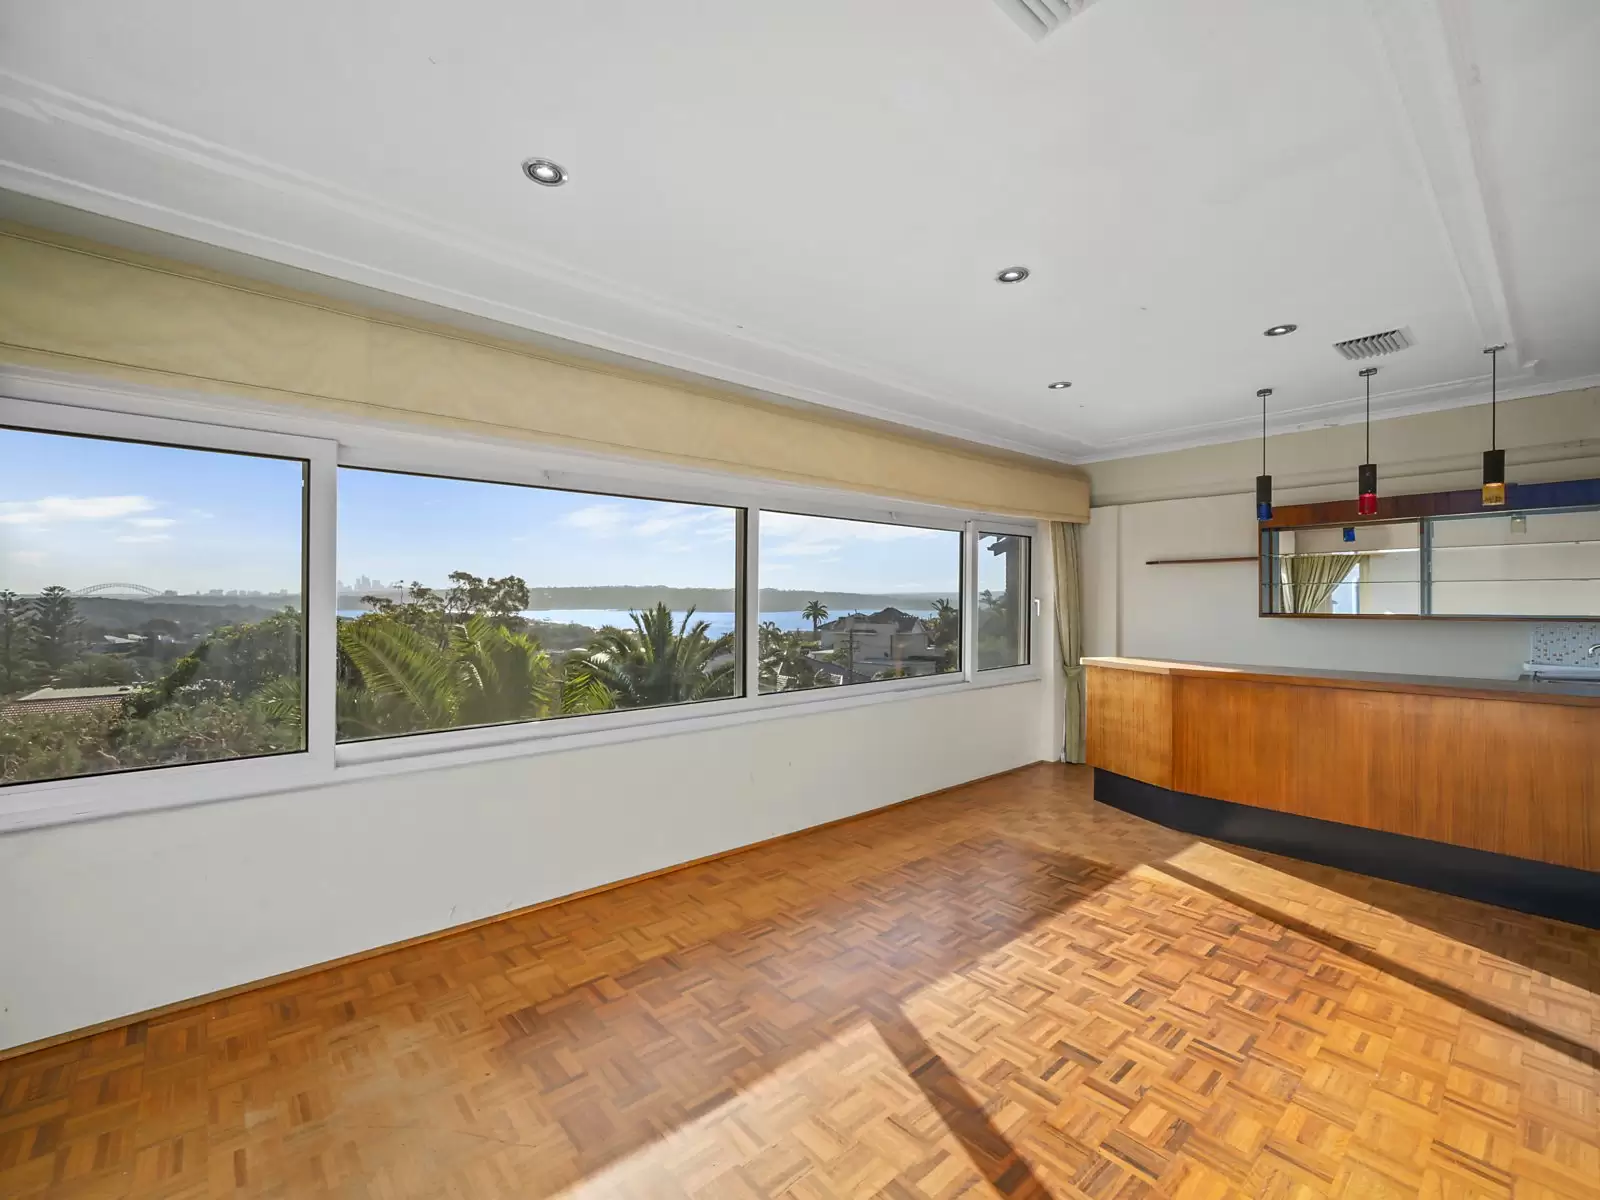 Photo #5: 23 Village High Road, Vaucluse - Sold by Sydney Sotheby's International Realty